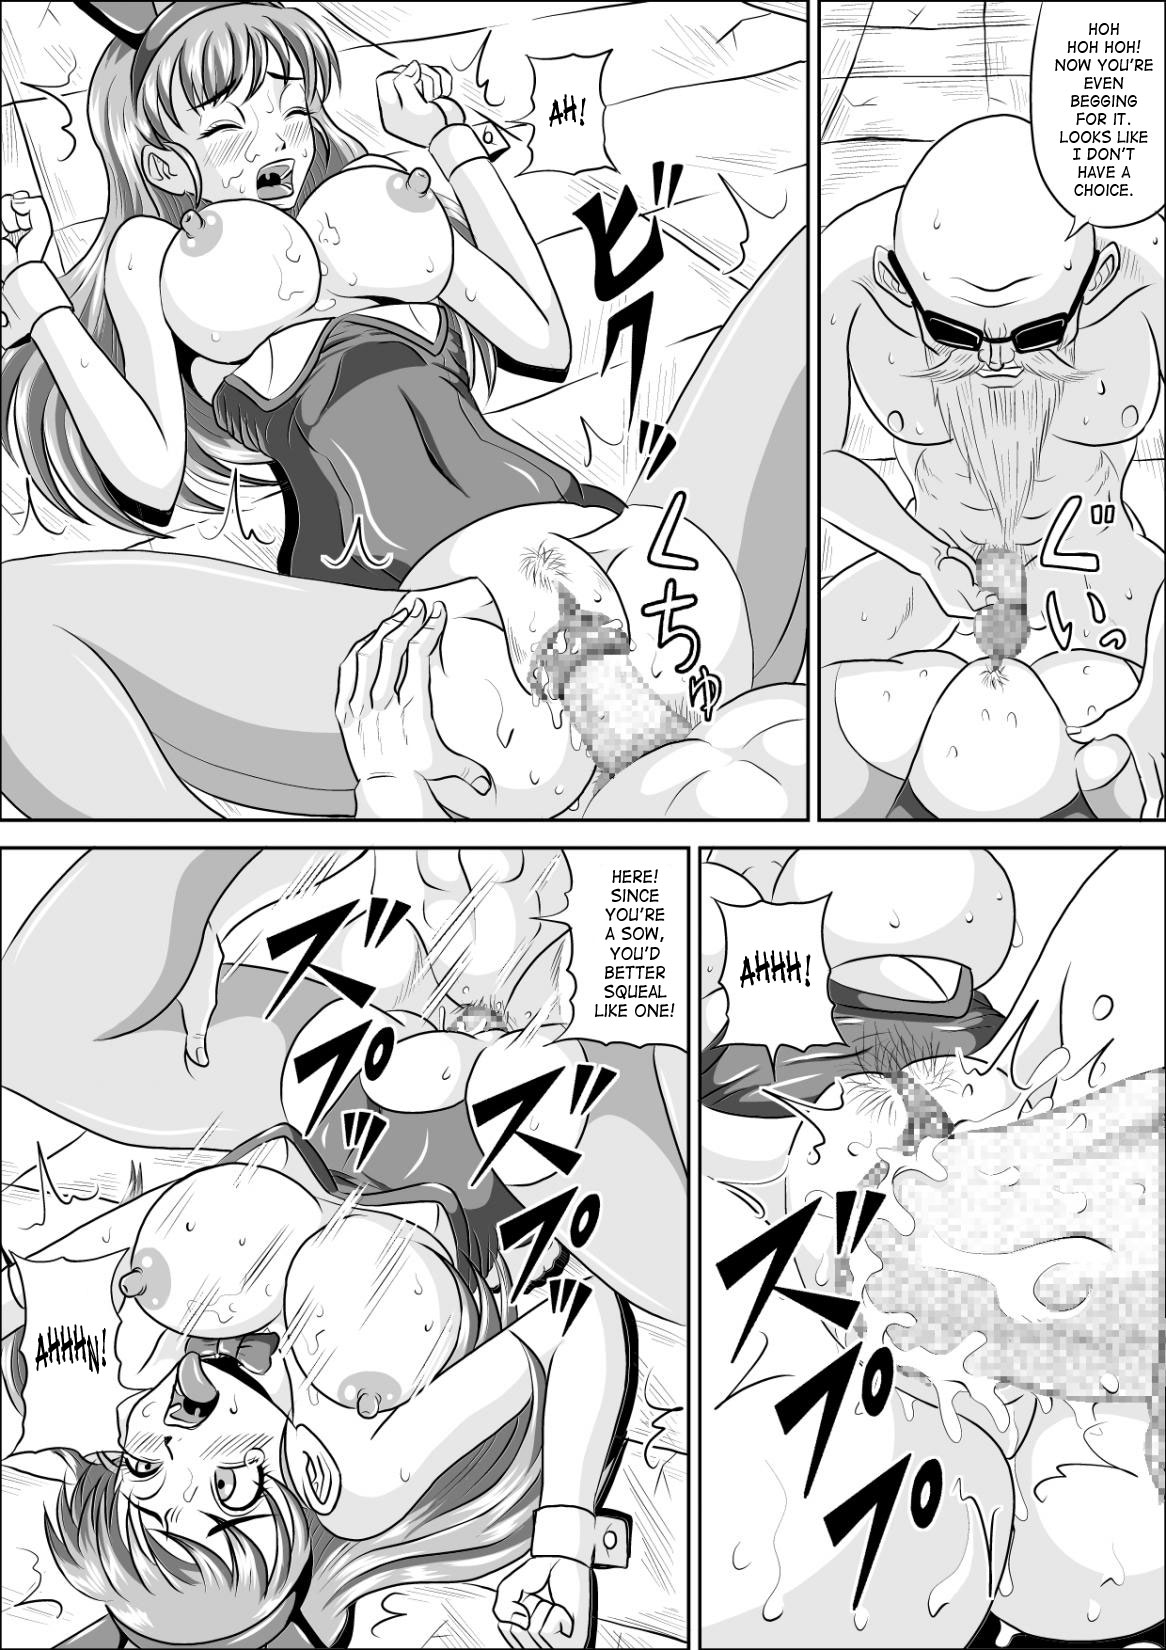 [Pyramid House] Sow in the Bunny (Dragon Ball) [English] {doujin-moe} page 17 full